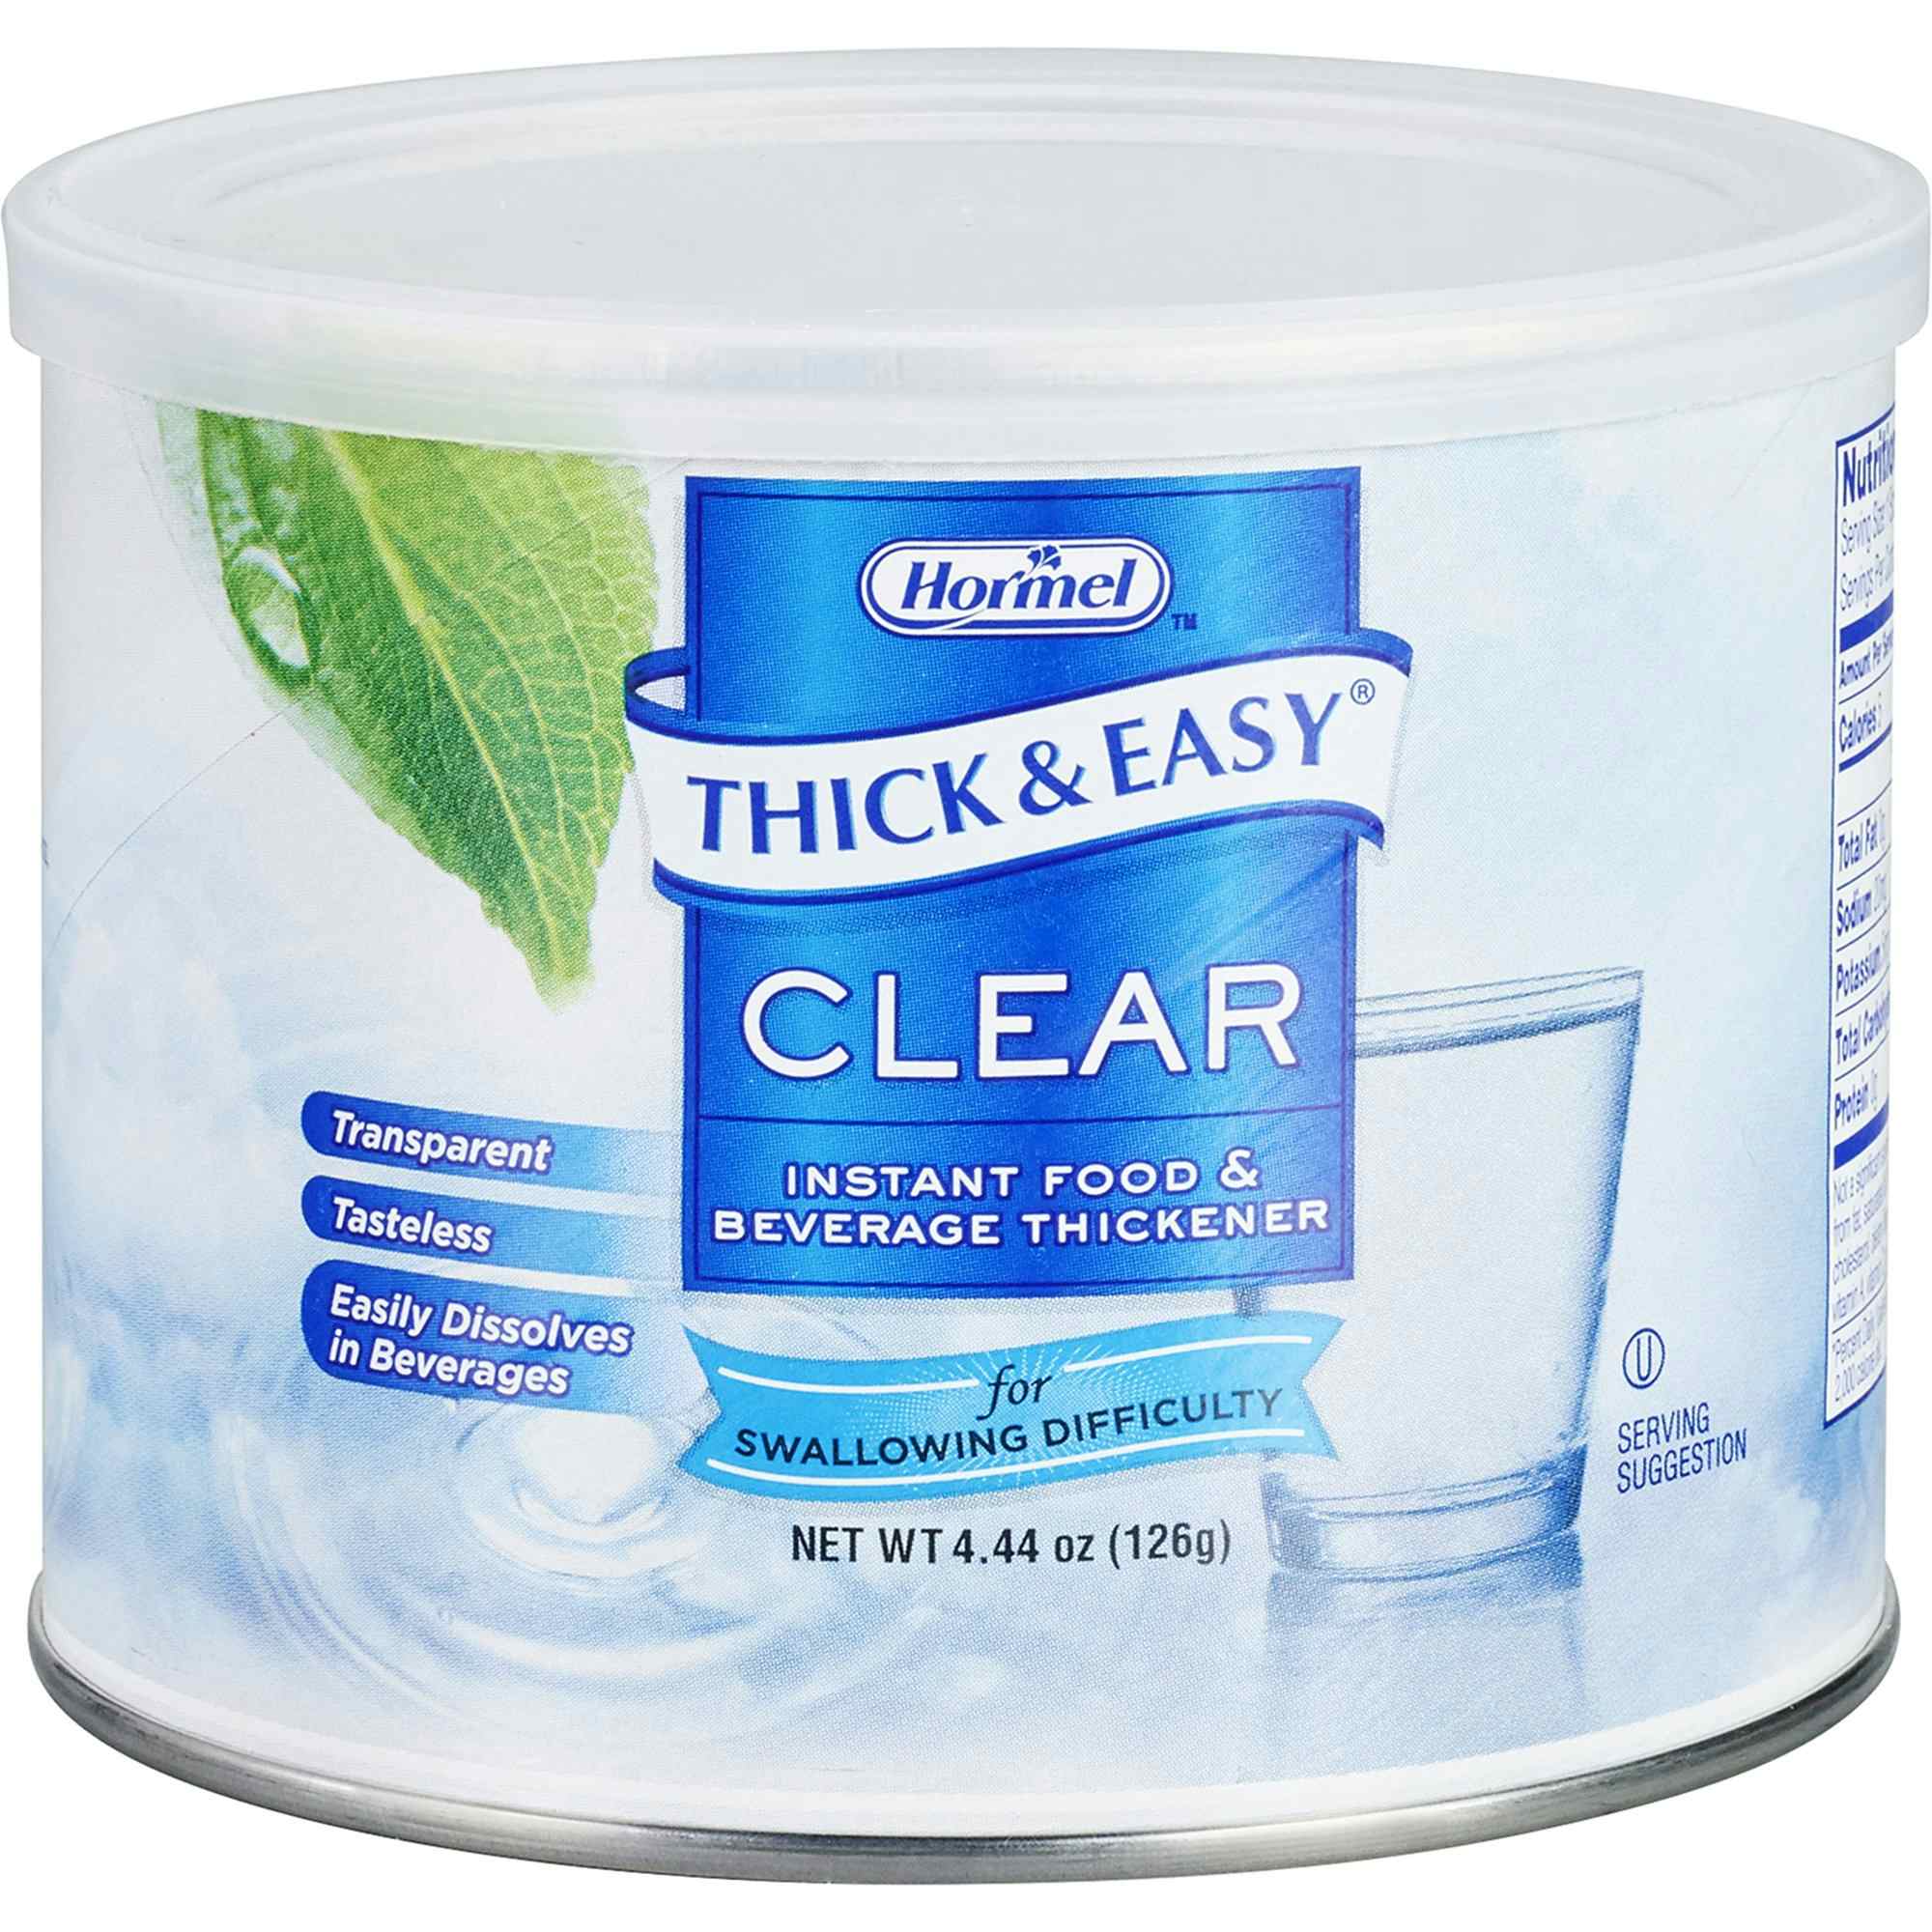 Thick & Easy Clear Food and Beverage Thickener, 4.4 oz. Canister, 25544, Case of 4